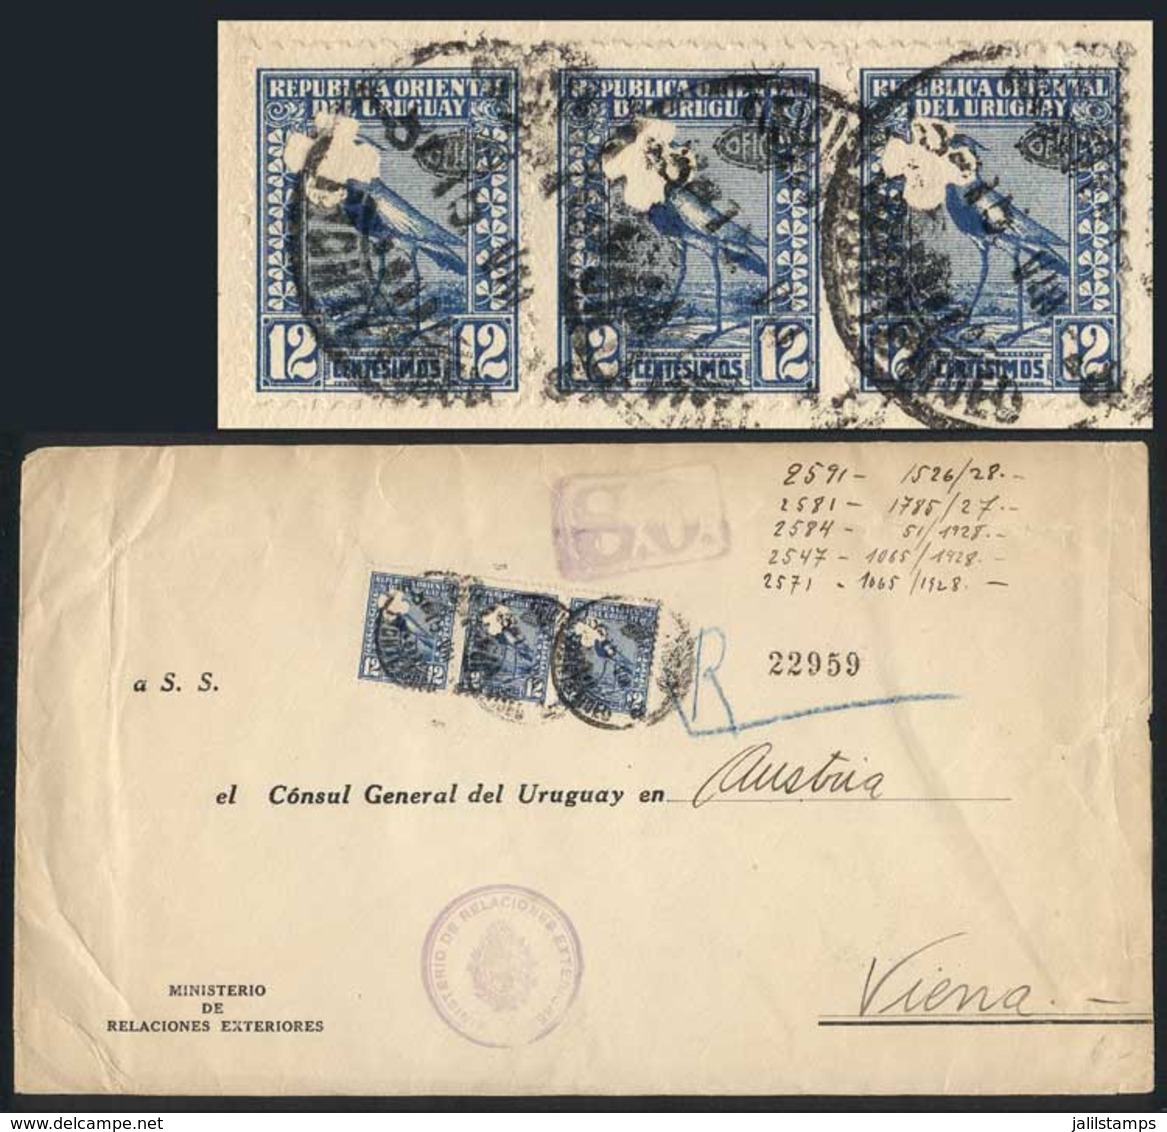 URUGUAY: Cover Sent To Austria On 15/AU/1928, Franked By Strip Of 3 Sc.O134 With Clover Punch Hole, VF Quality, Rare! - Uruguay